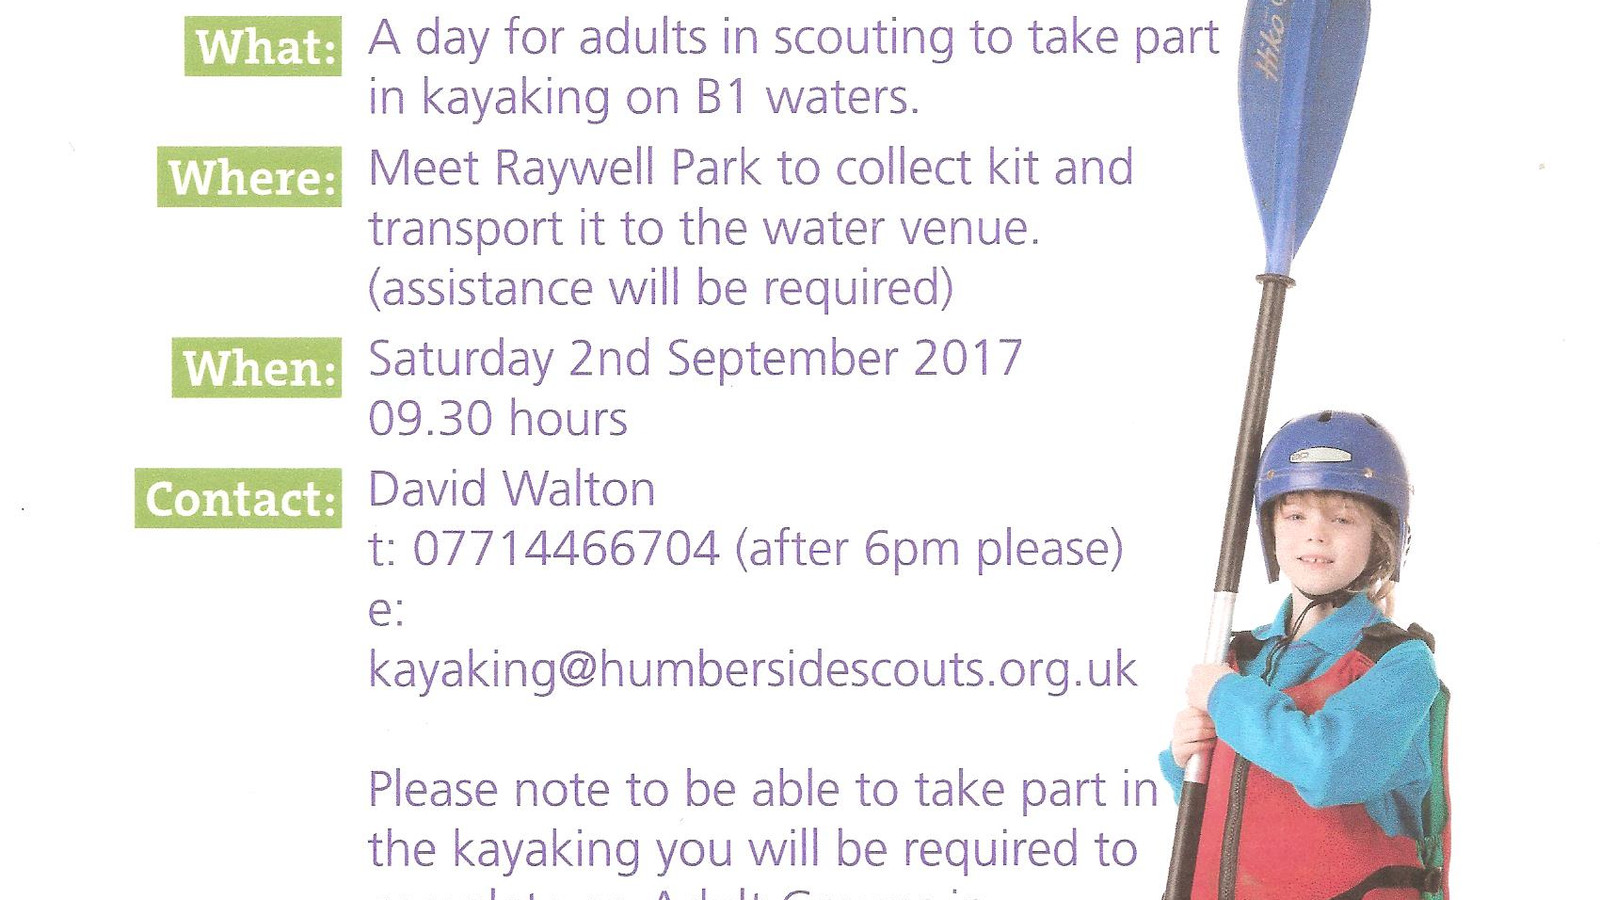 Humberside Scouts Kayaking for Adults